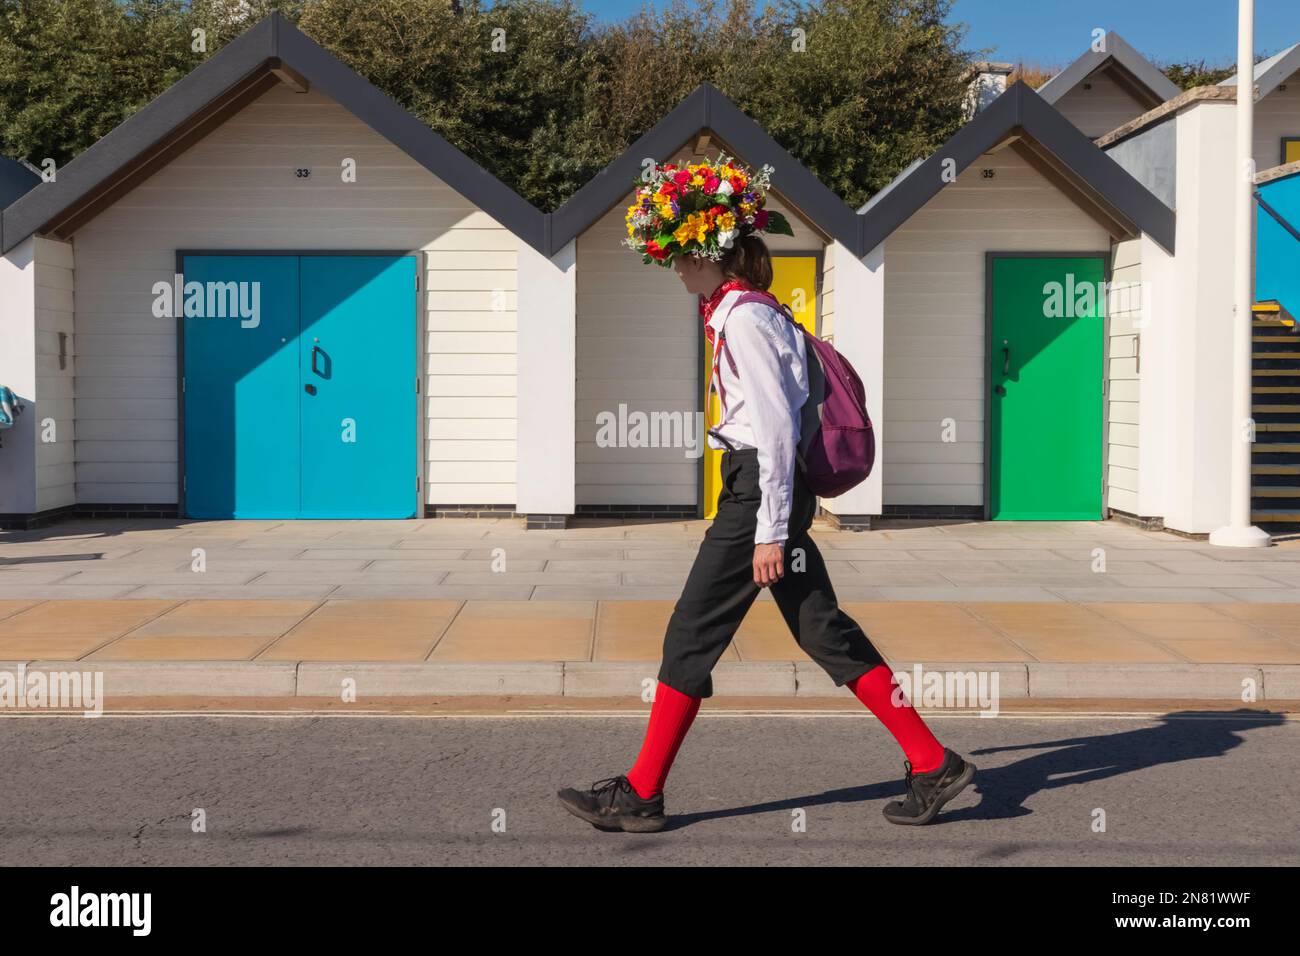 England, Dorset, Isle of Purbeck, Swanage, Swanage Folk Festival, Morris Dancer Walking in front of Colourful Beach Huts Stock Photo